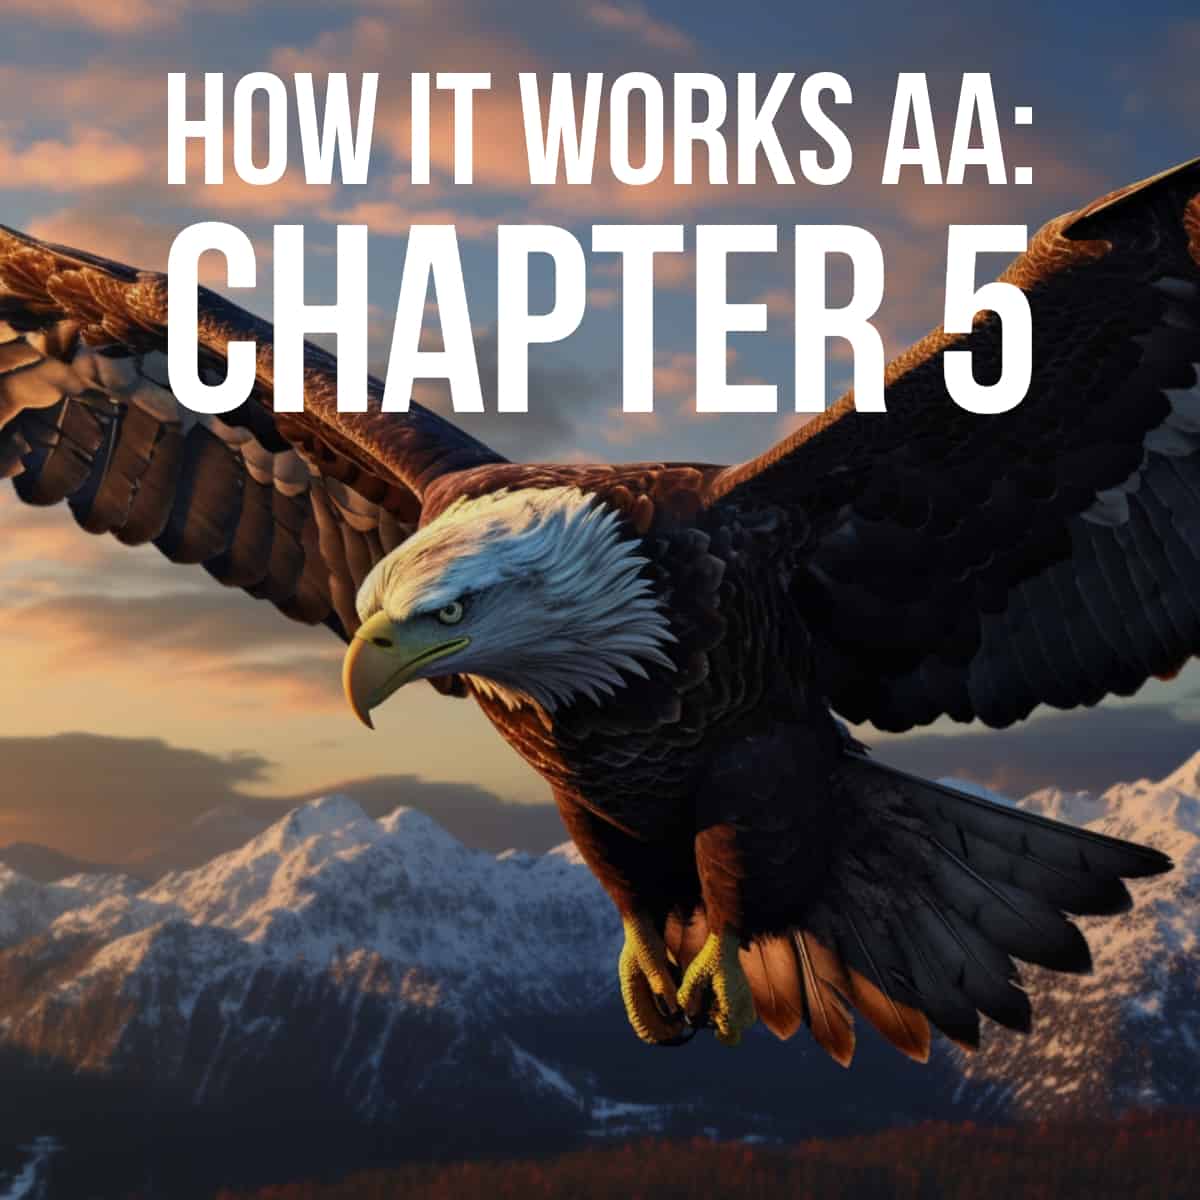 read about HOW IT WORKS AA CHAPTER 5